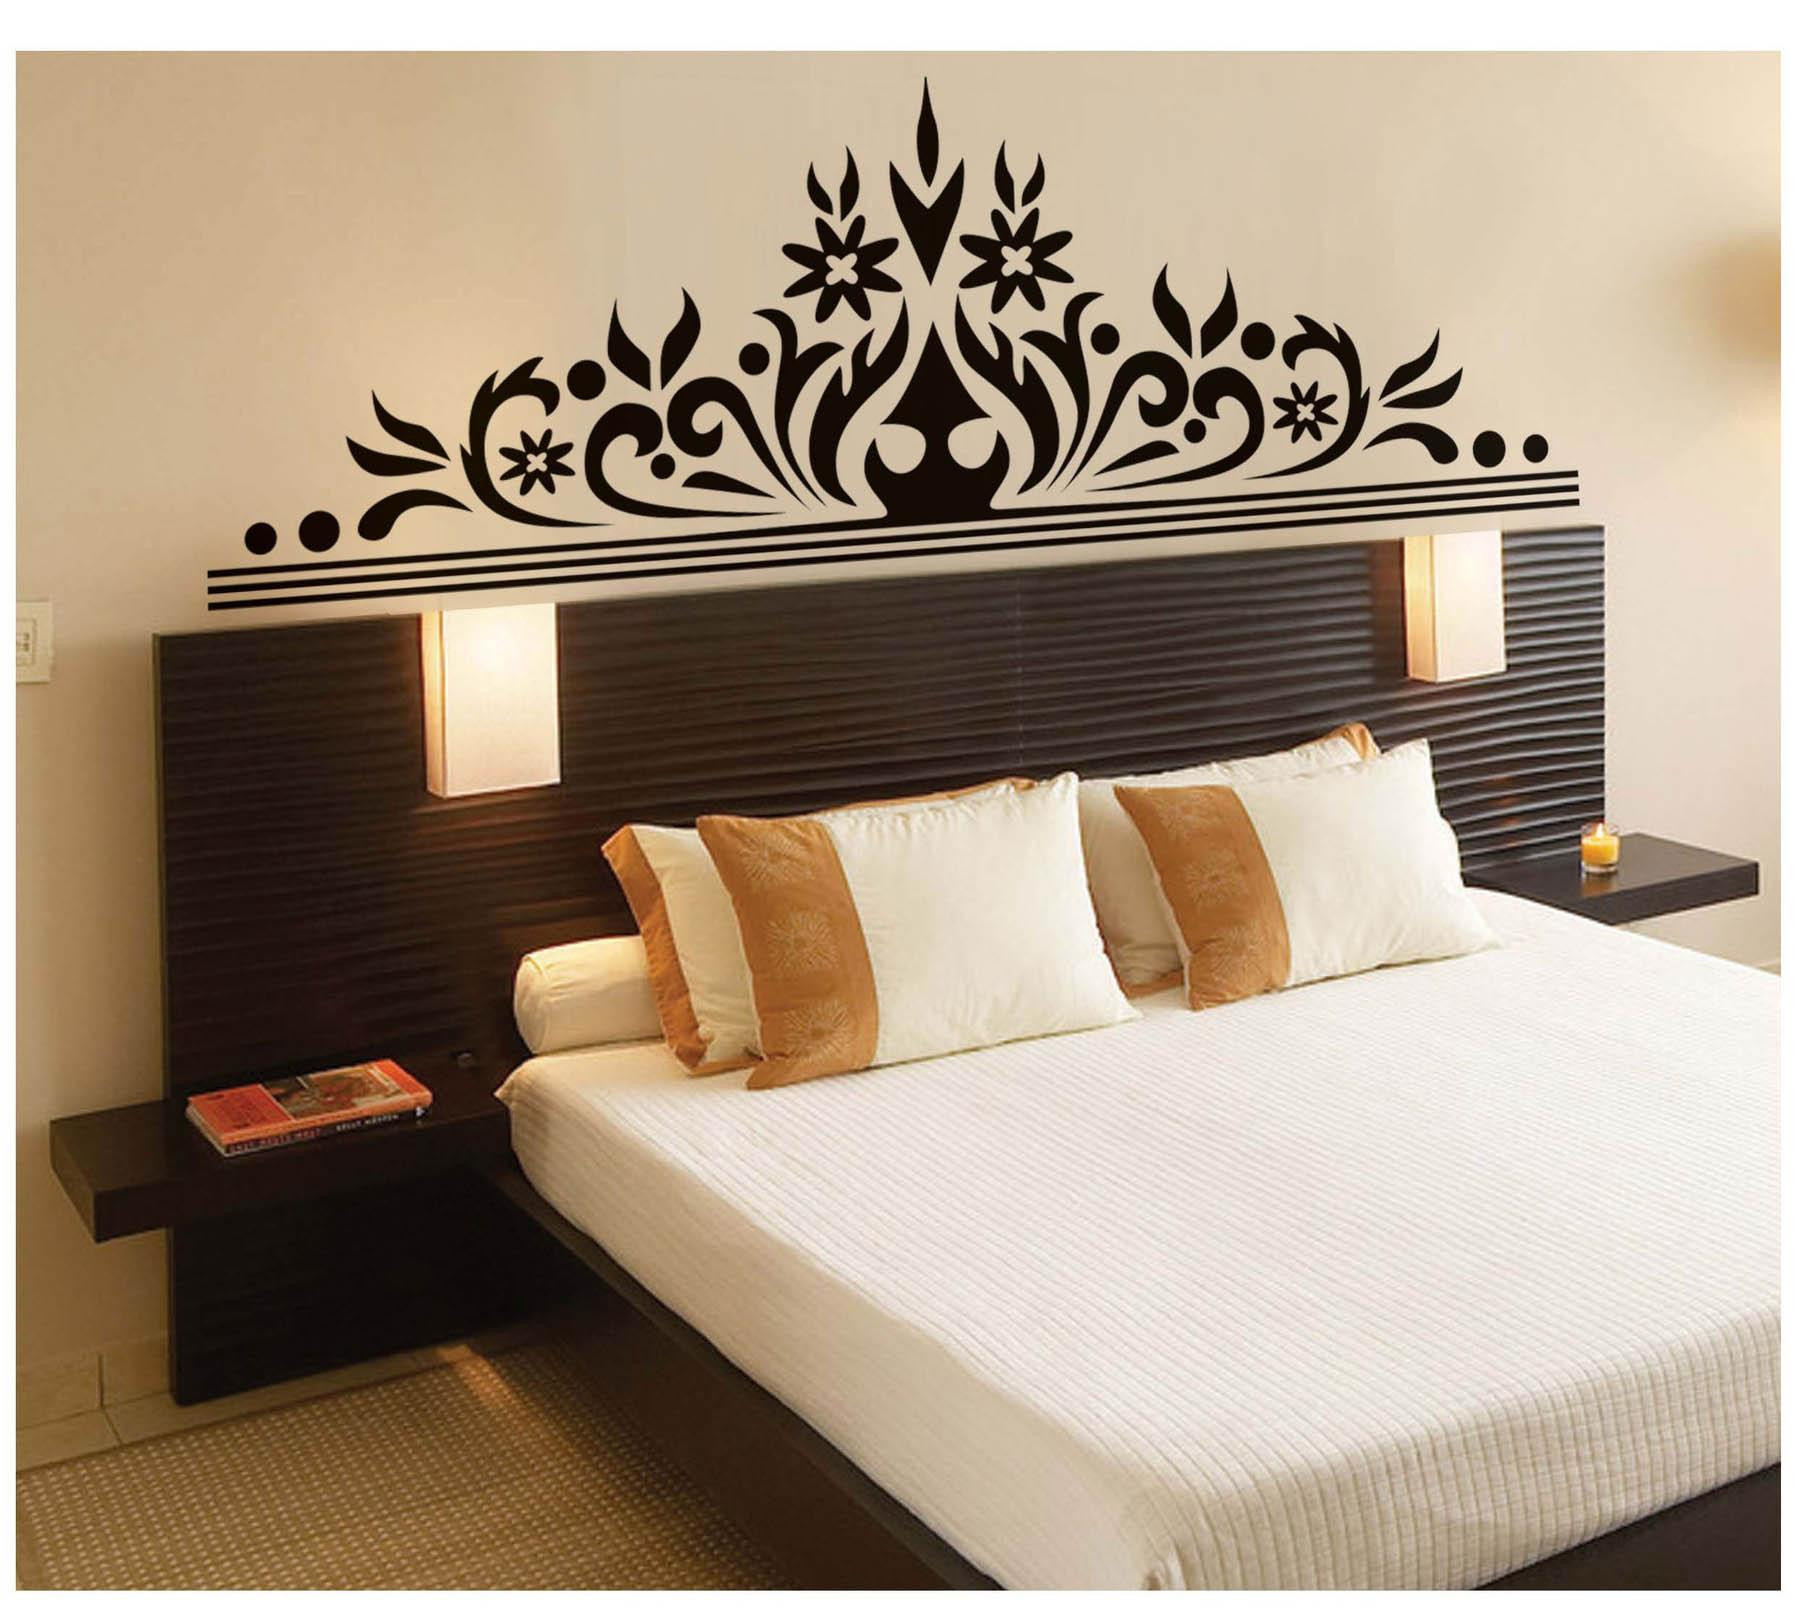 Wall Stickers for Bedroom New Bedroom Wall Art Decal Sticker Headboard Wall Decoration